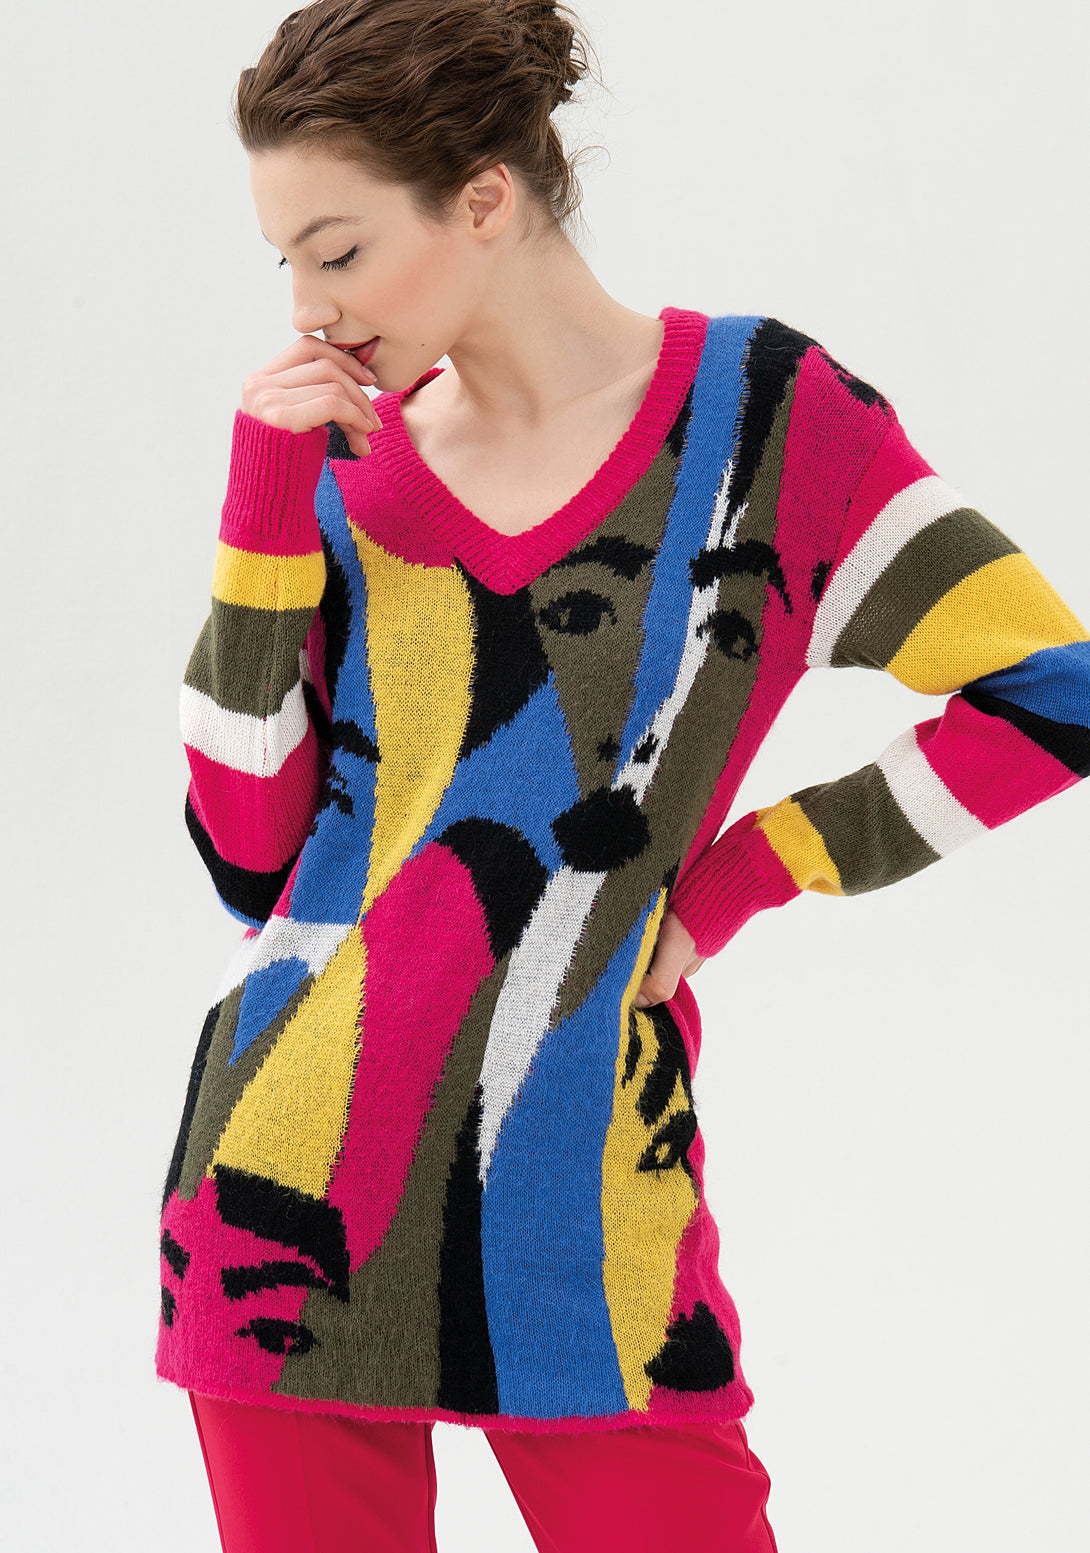 Knitwear over fit, long, with multicolor jacquard effect